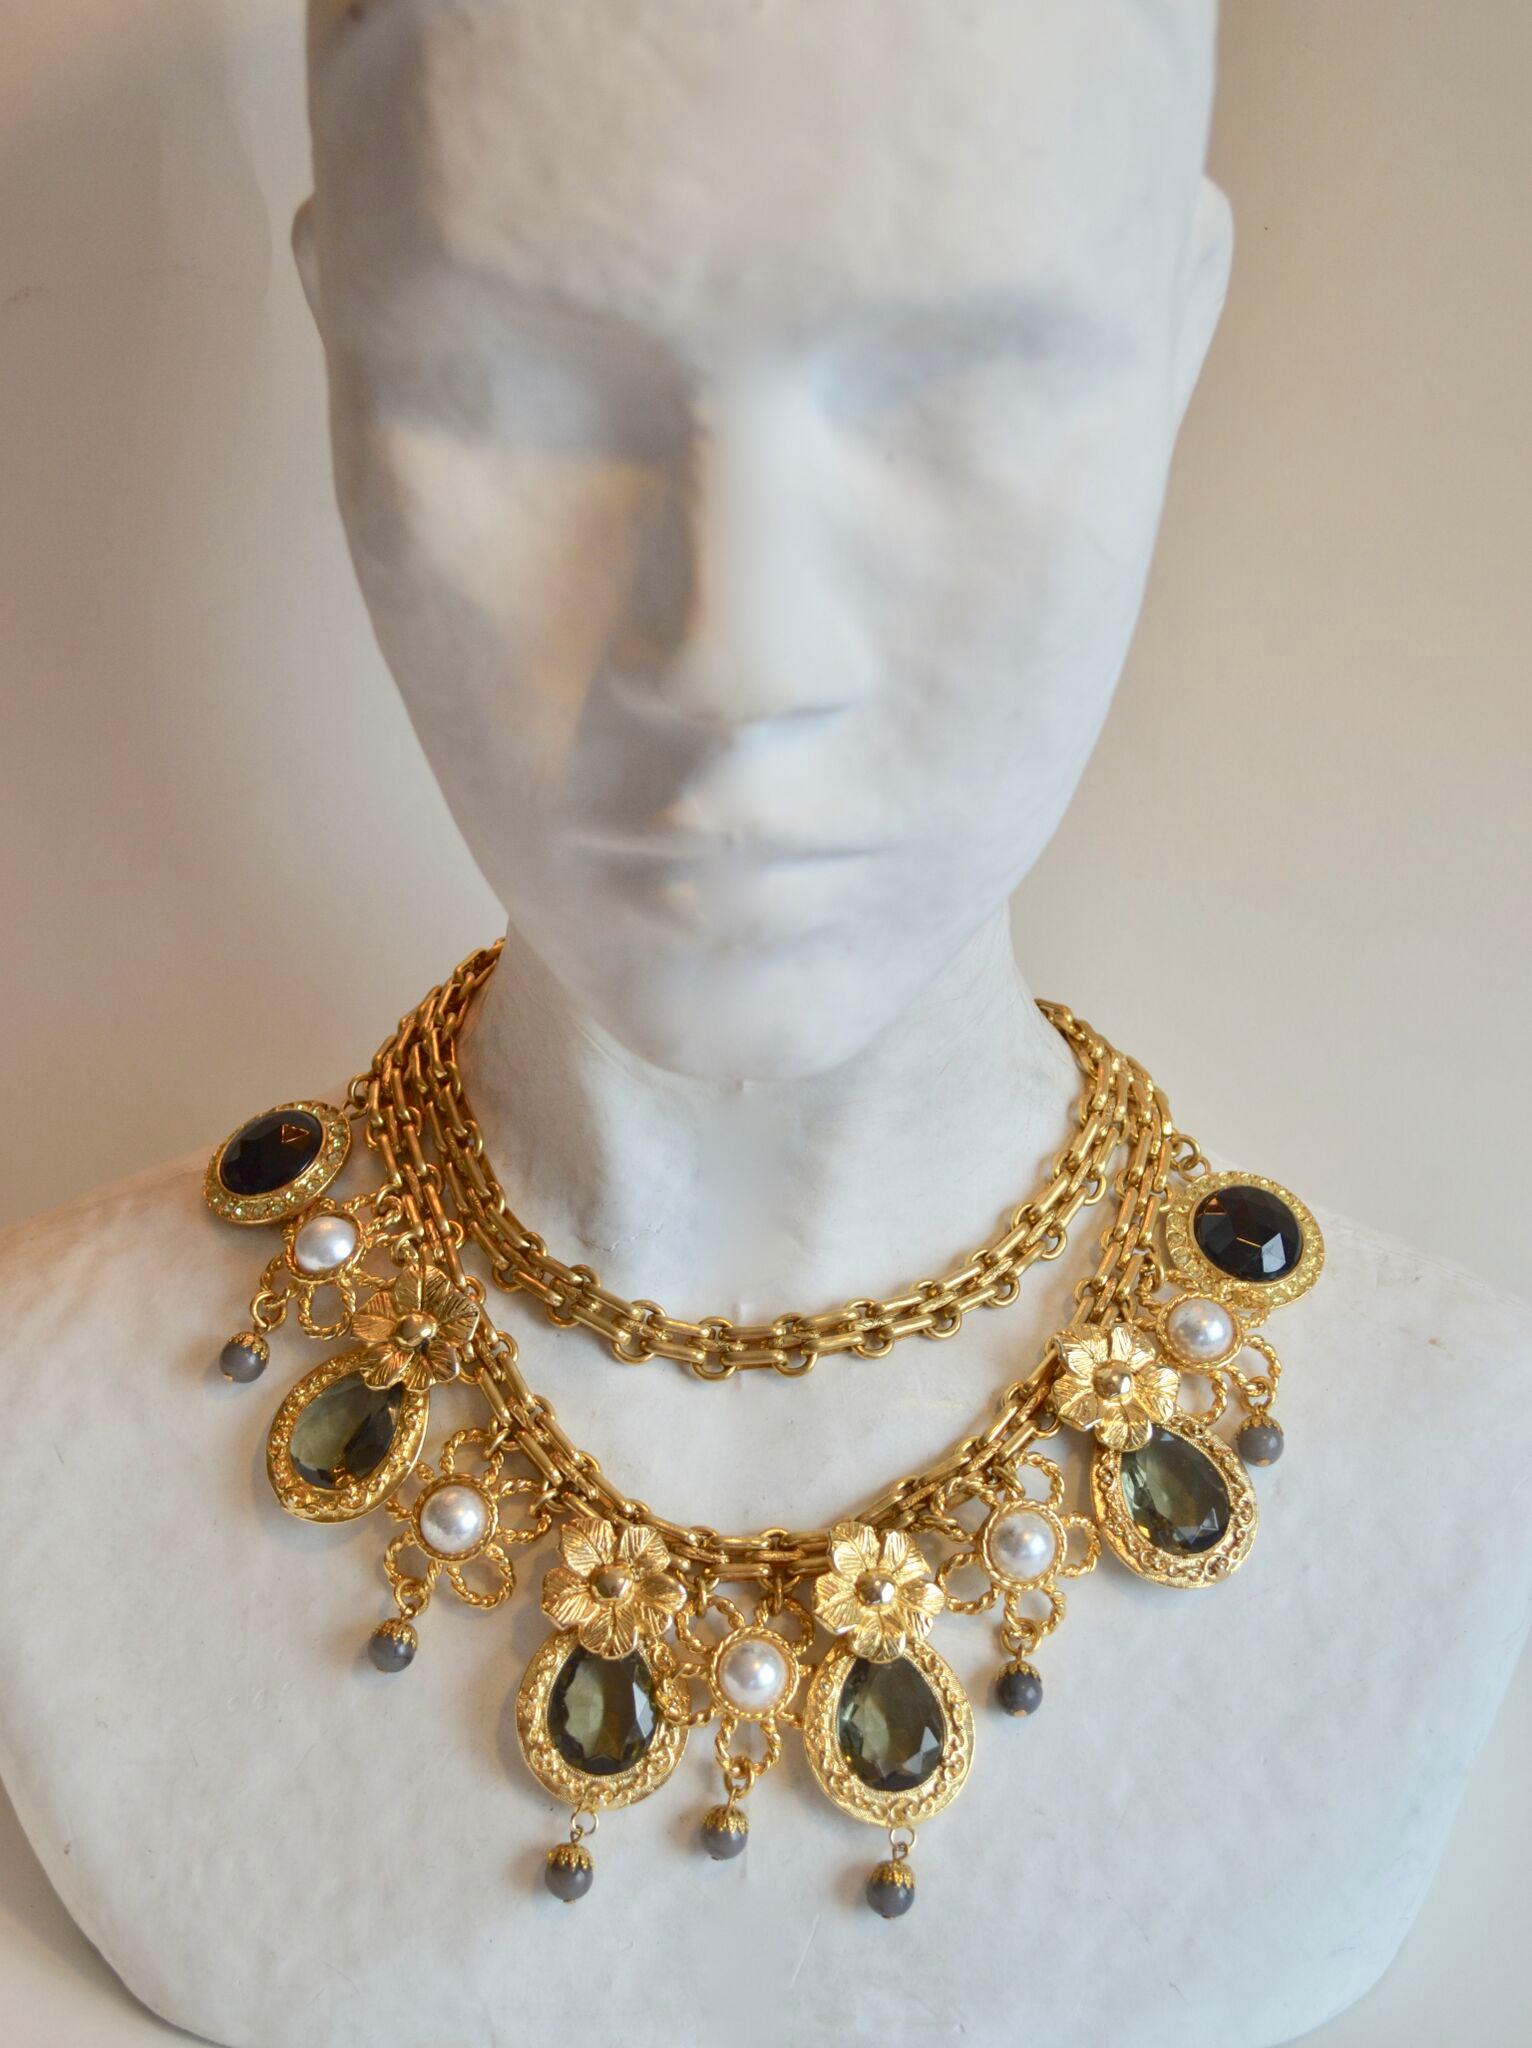 Double chain necklace with gorgeous vintage charms from French designer Francoise Montague. 